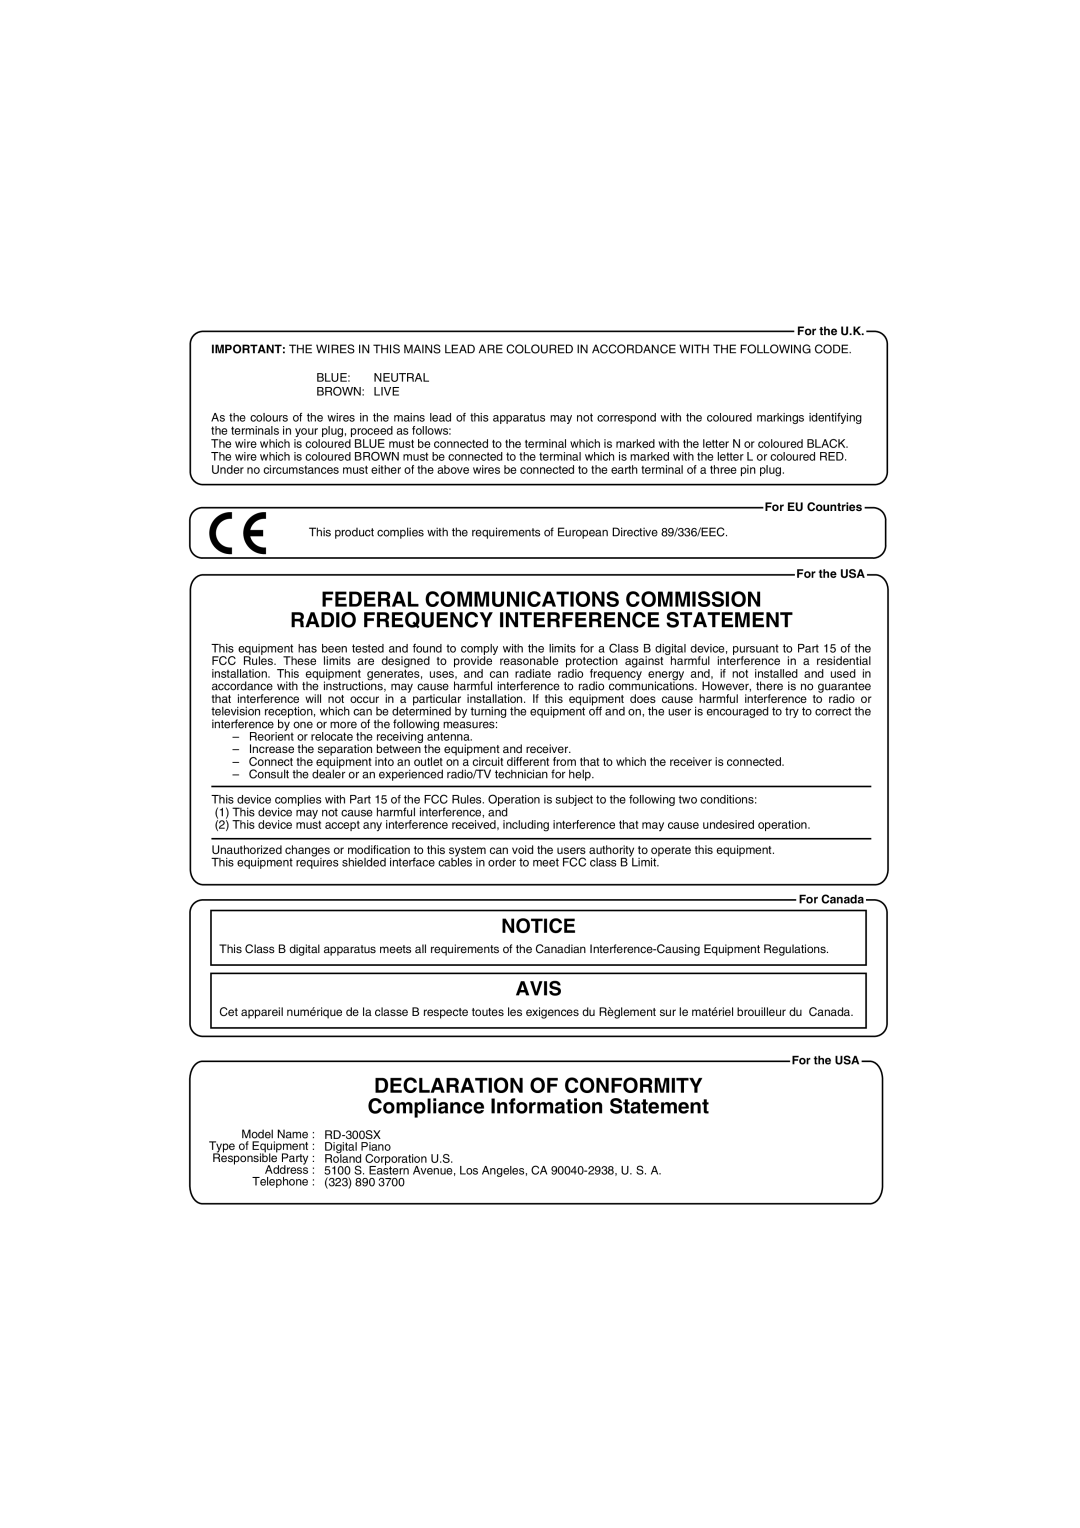 Roland RD-300SX owner manual Federal Communications Commission, Radio Frequency Interference Statement, Avis 